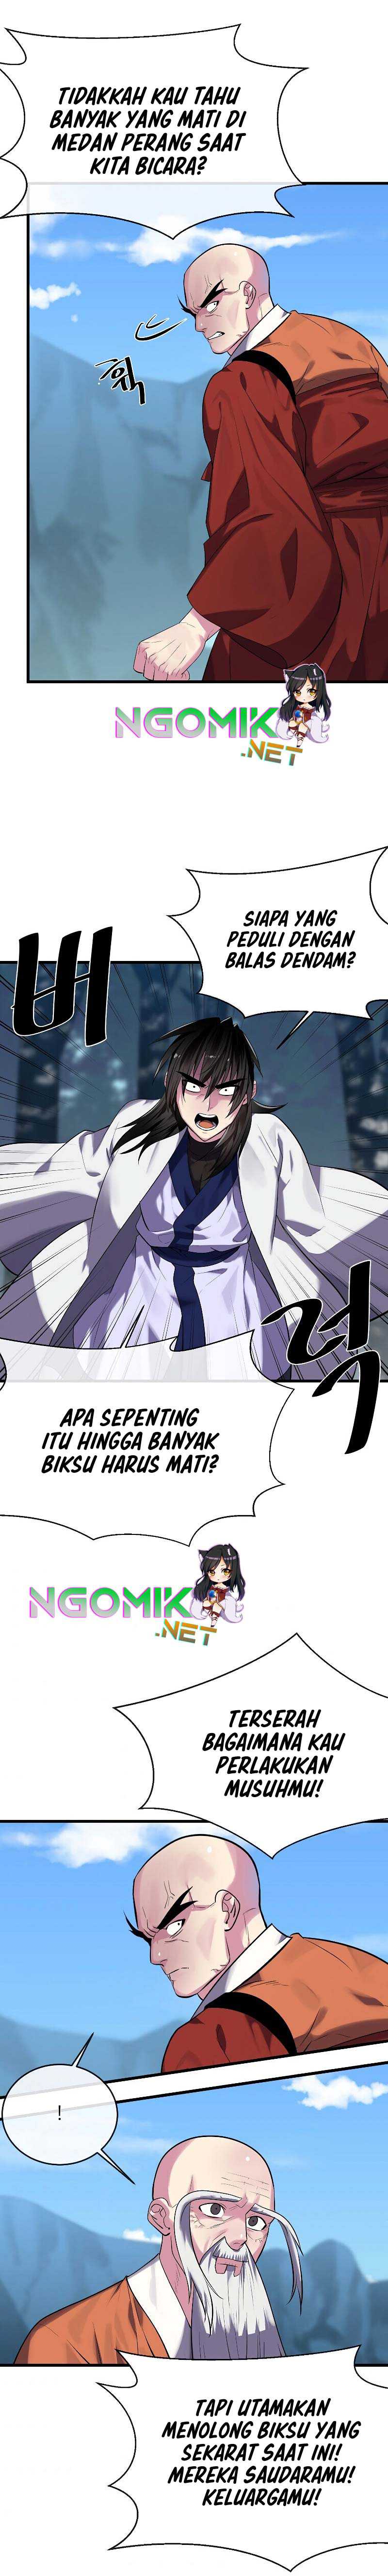 Volcanic Age Chapter 188